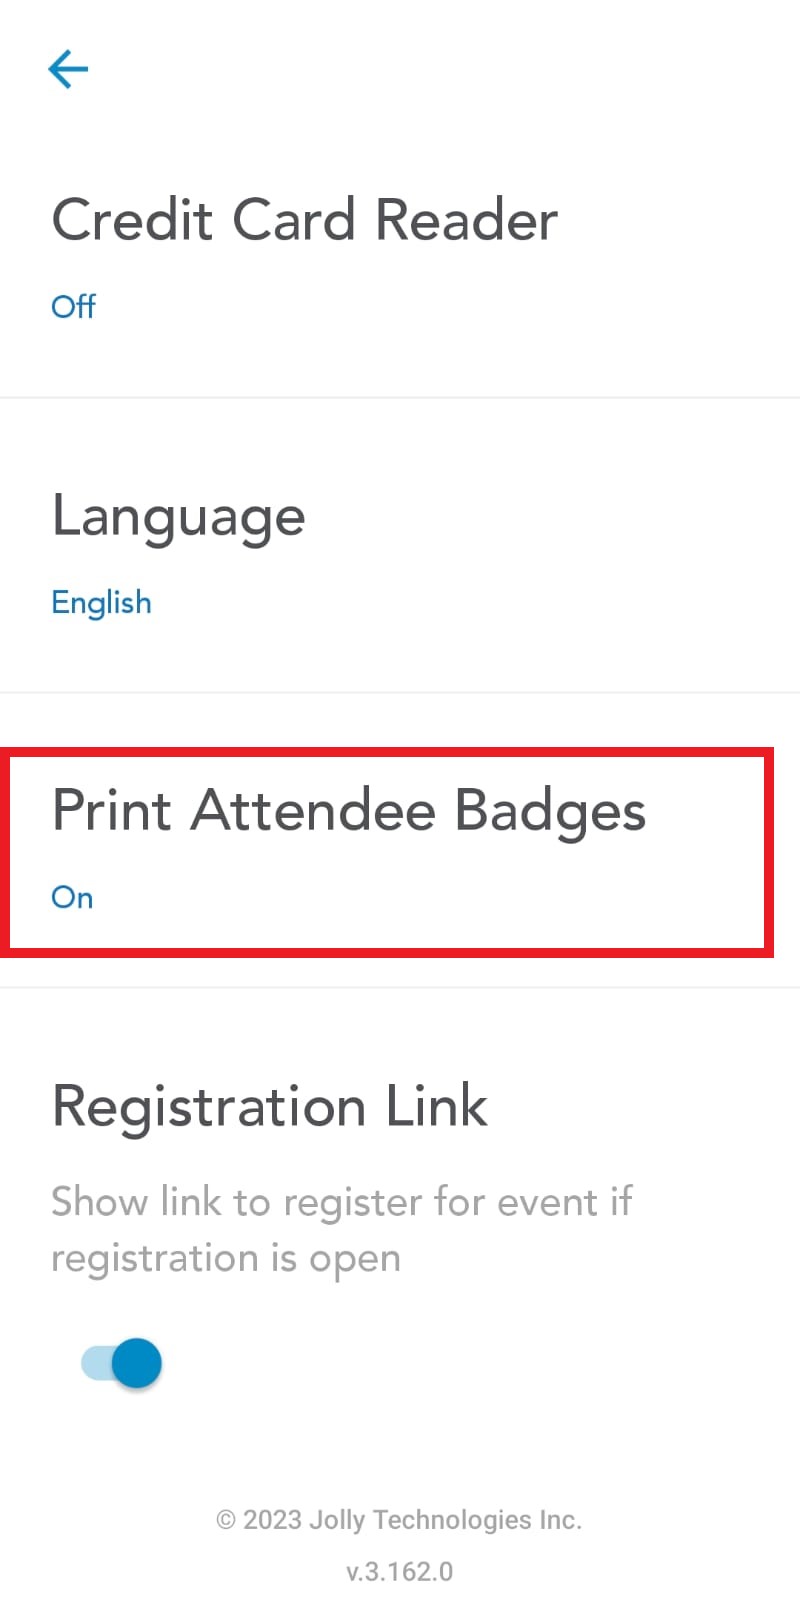 Scroll down to Print Attendee Badges and tap on it